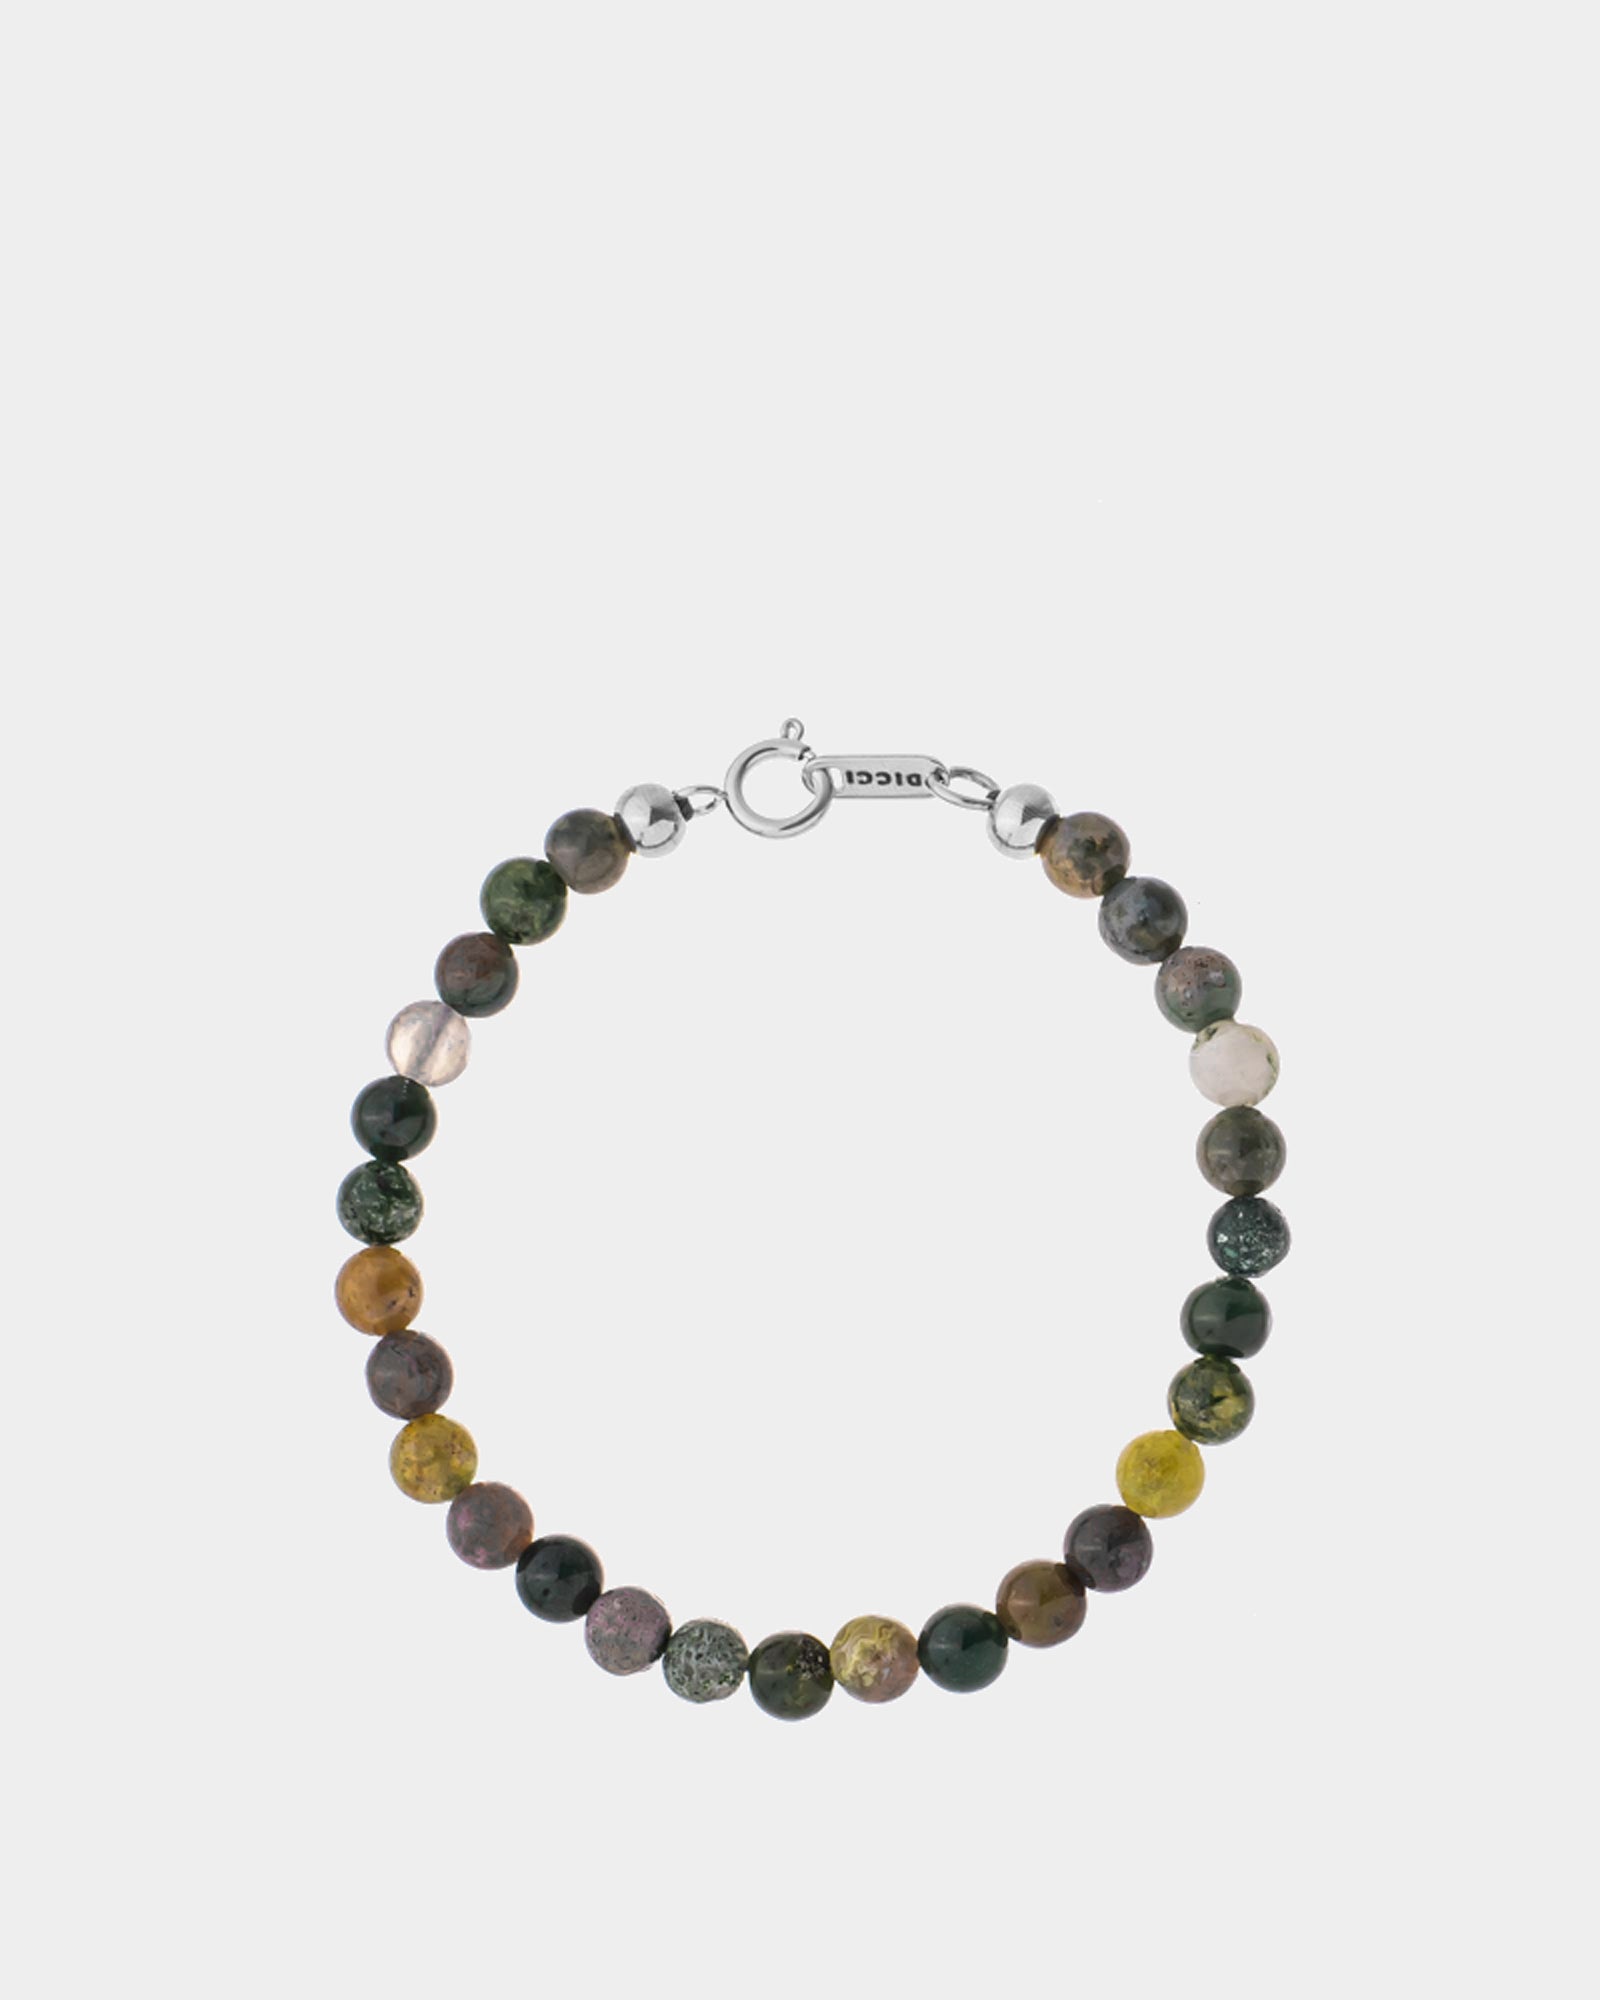 Green Agate Stone Bracelet 6mm - Natural Beads and 316L stainless steel - Online Unissex Jewelry - Dicci